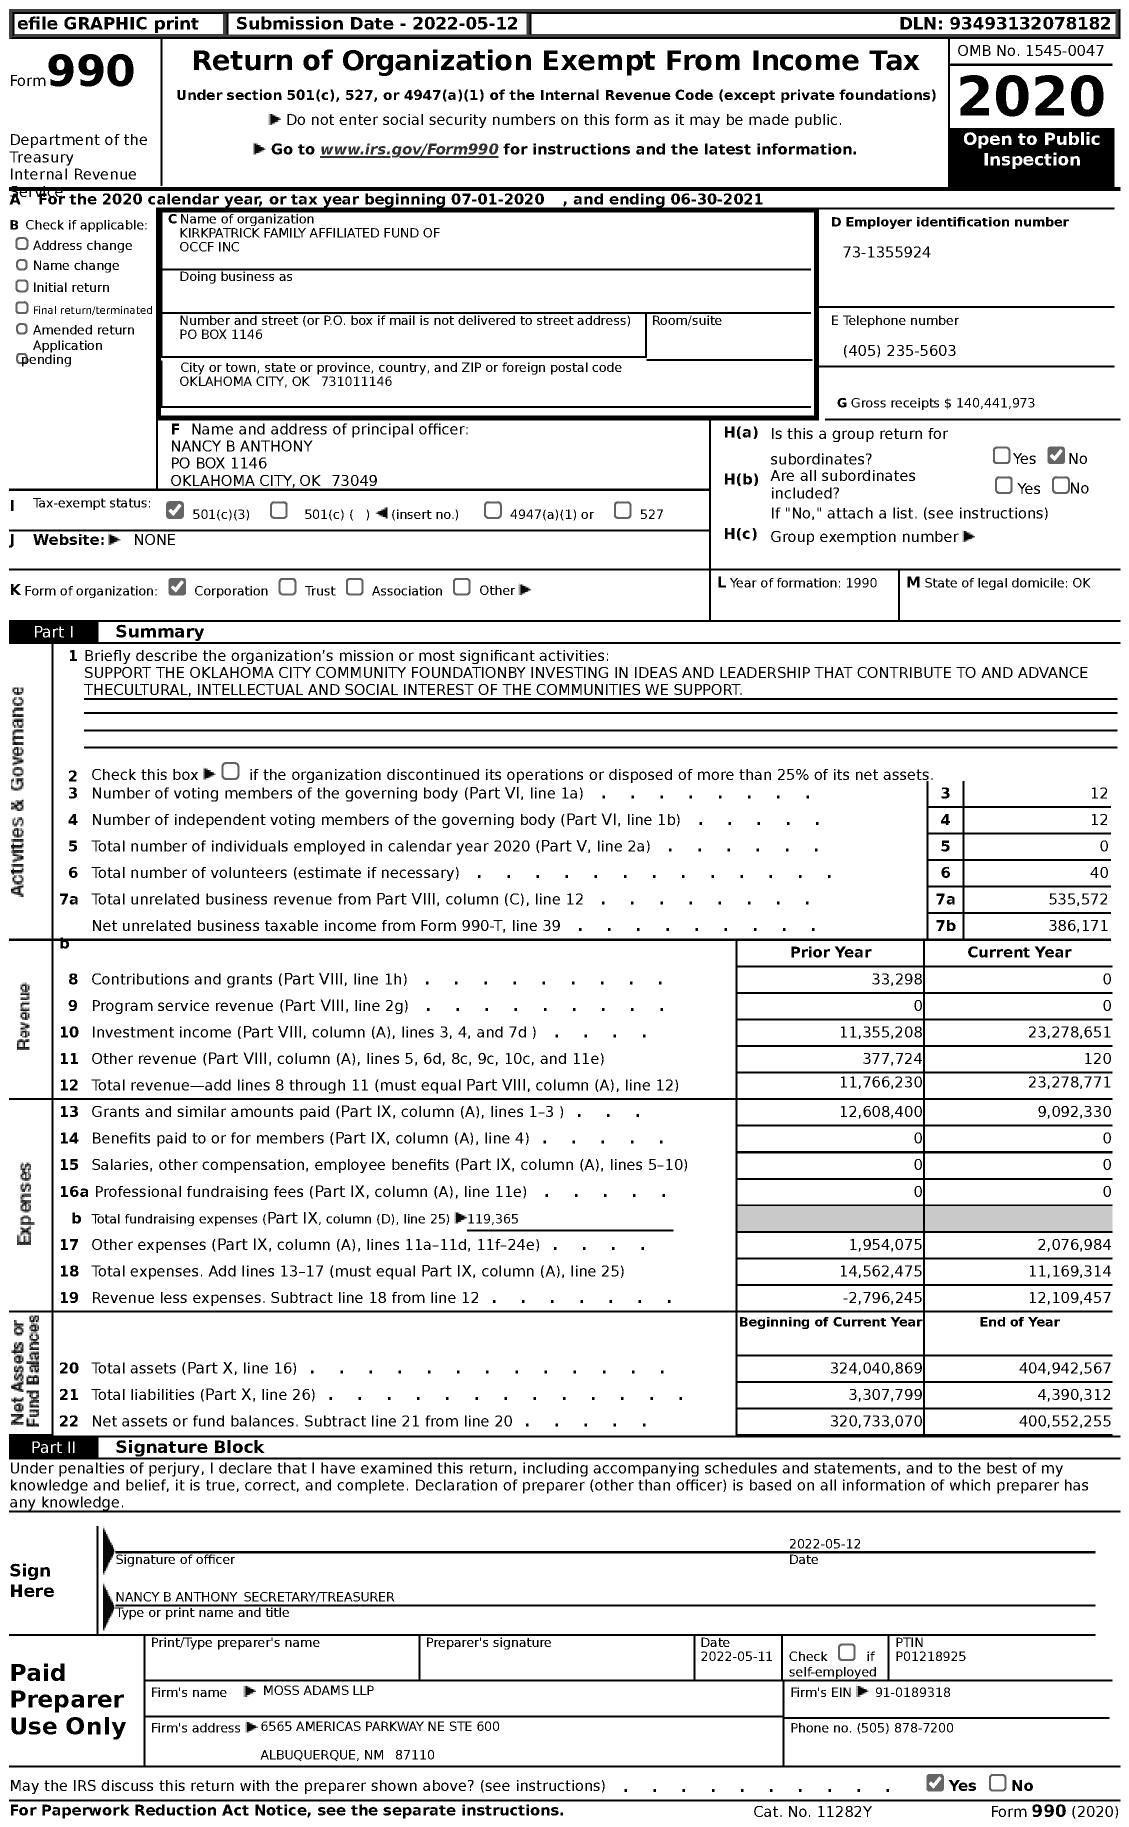 Image of first page of 2020 Form 990 for Kirkpatrick Family Affiliated Fund of Occf